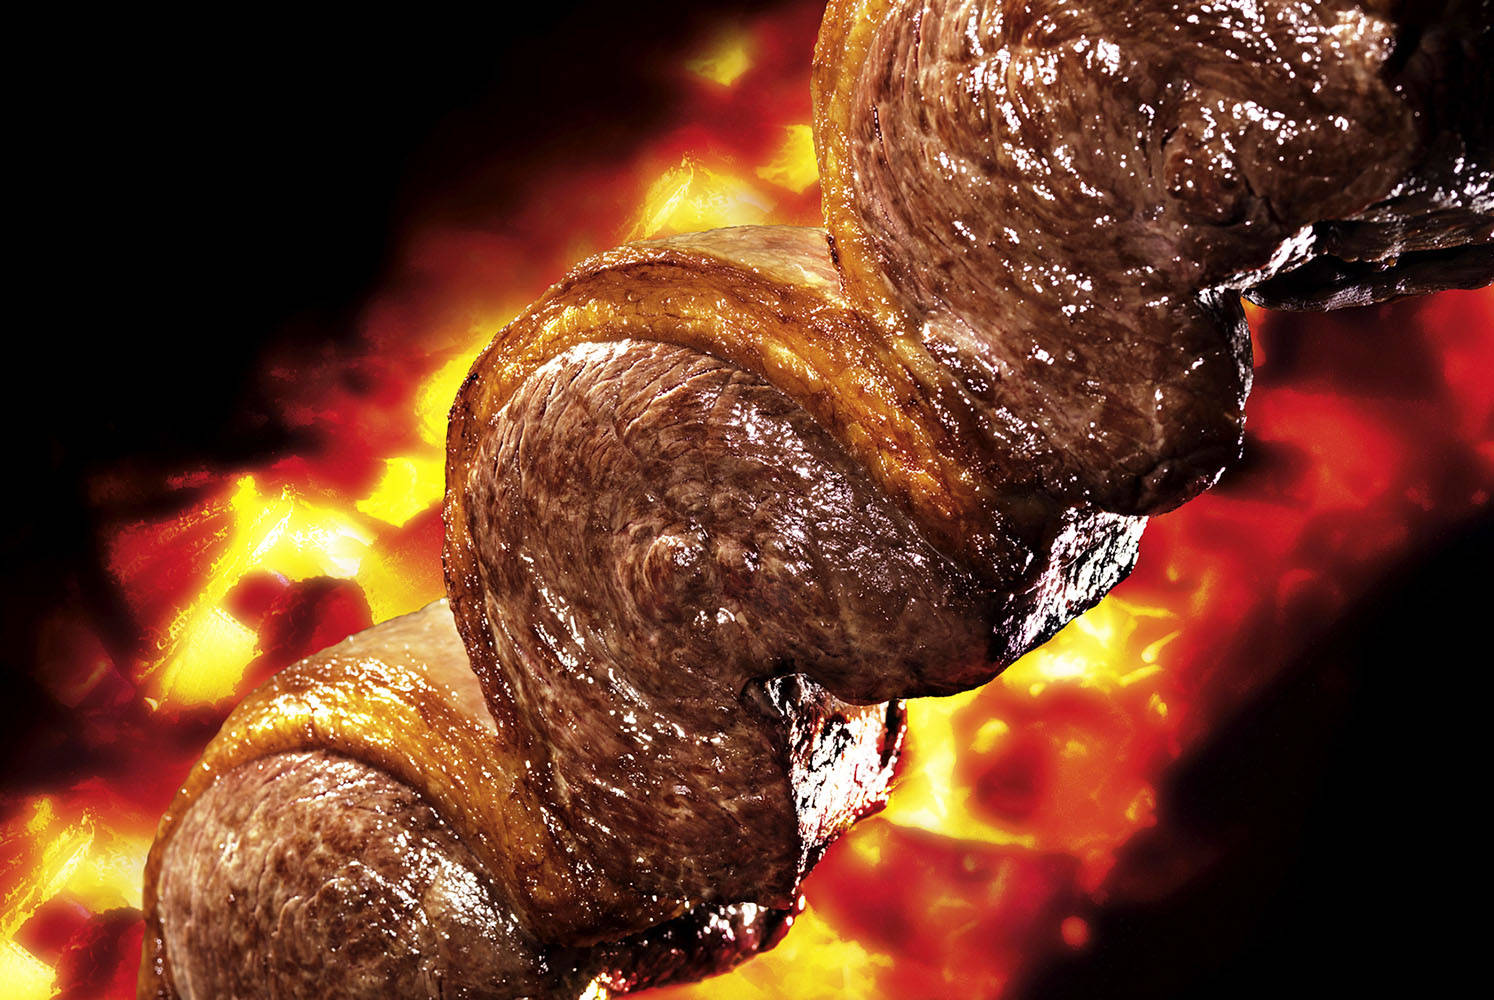 A delightful close-up view of Churrasco grilling Wallpaper